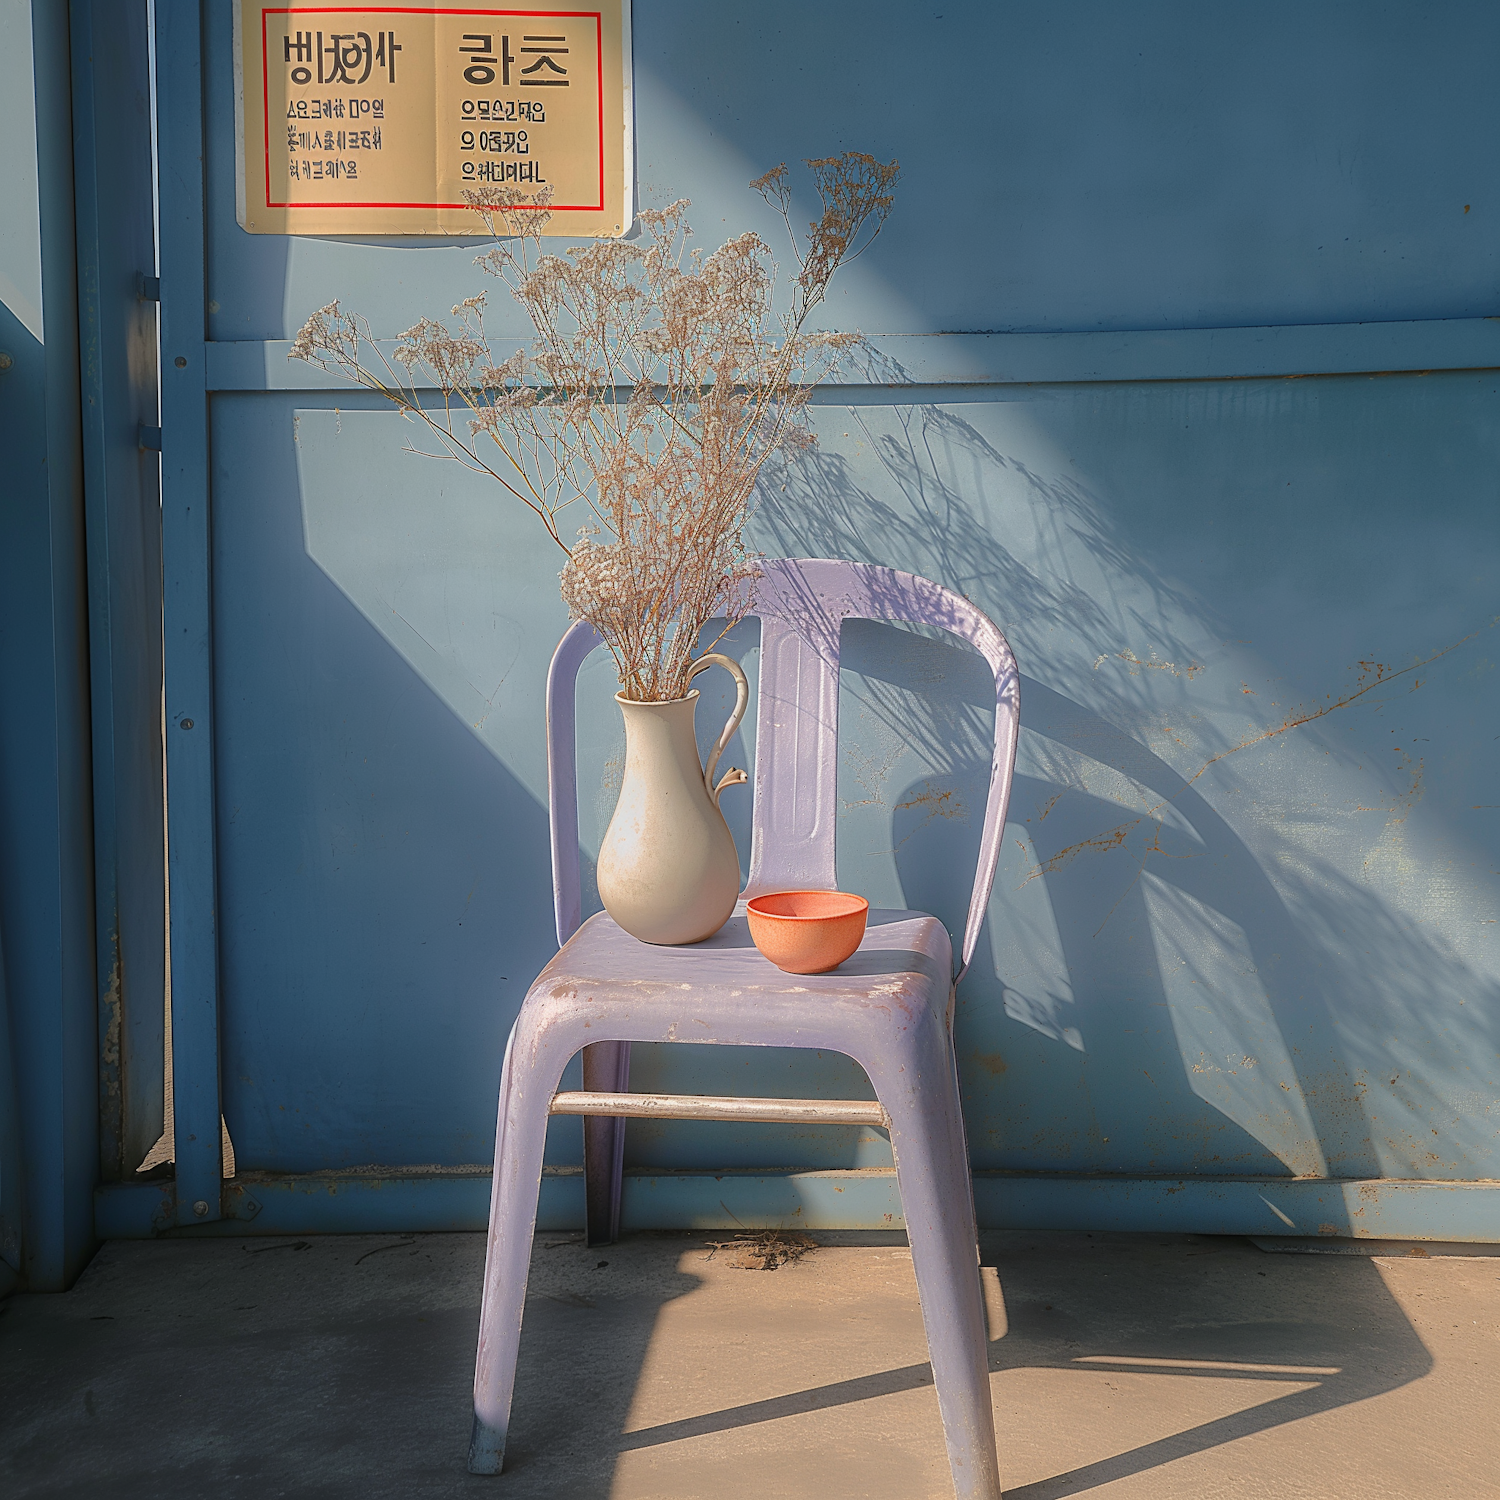 Serenity in Simplicity: Chair and Shadows